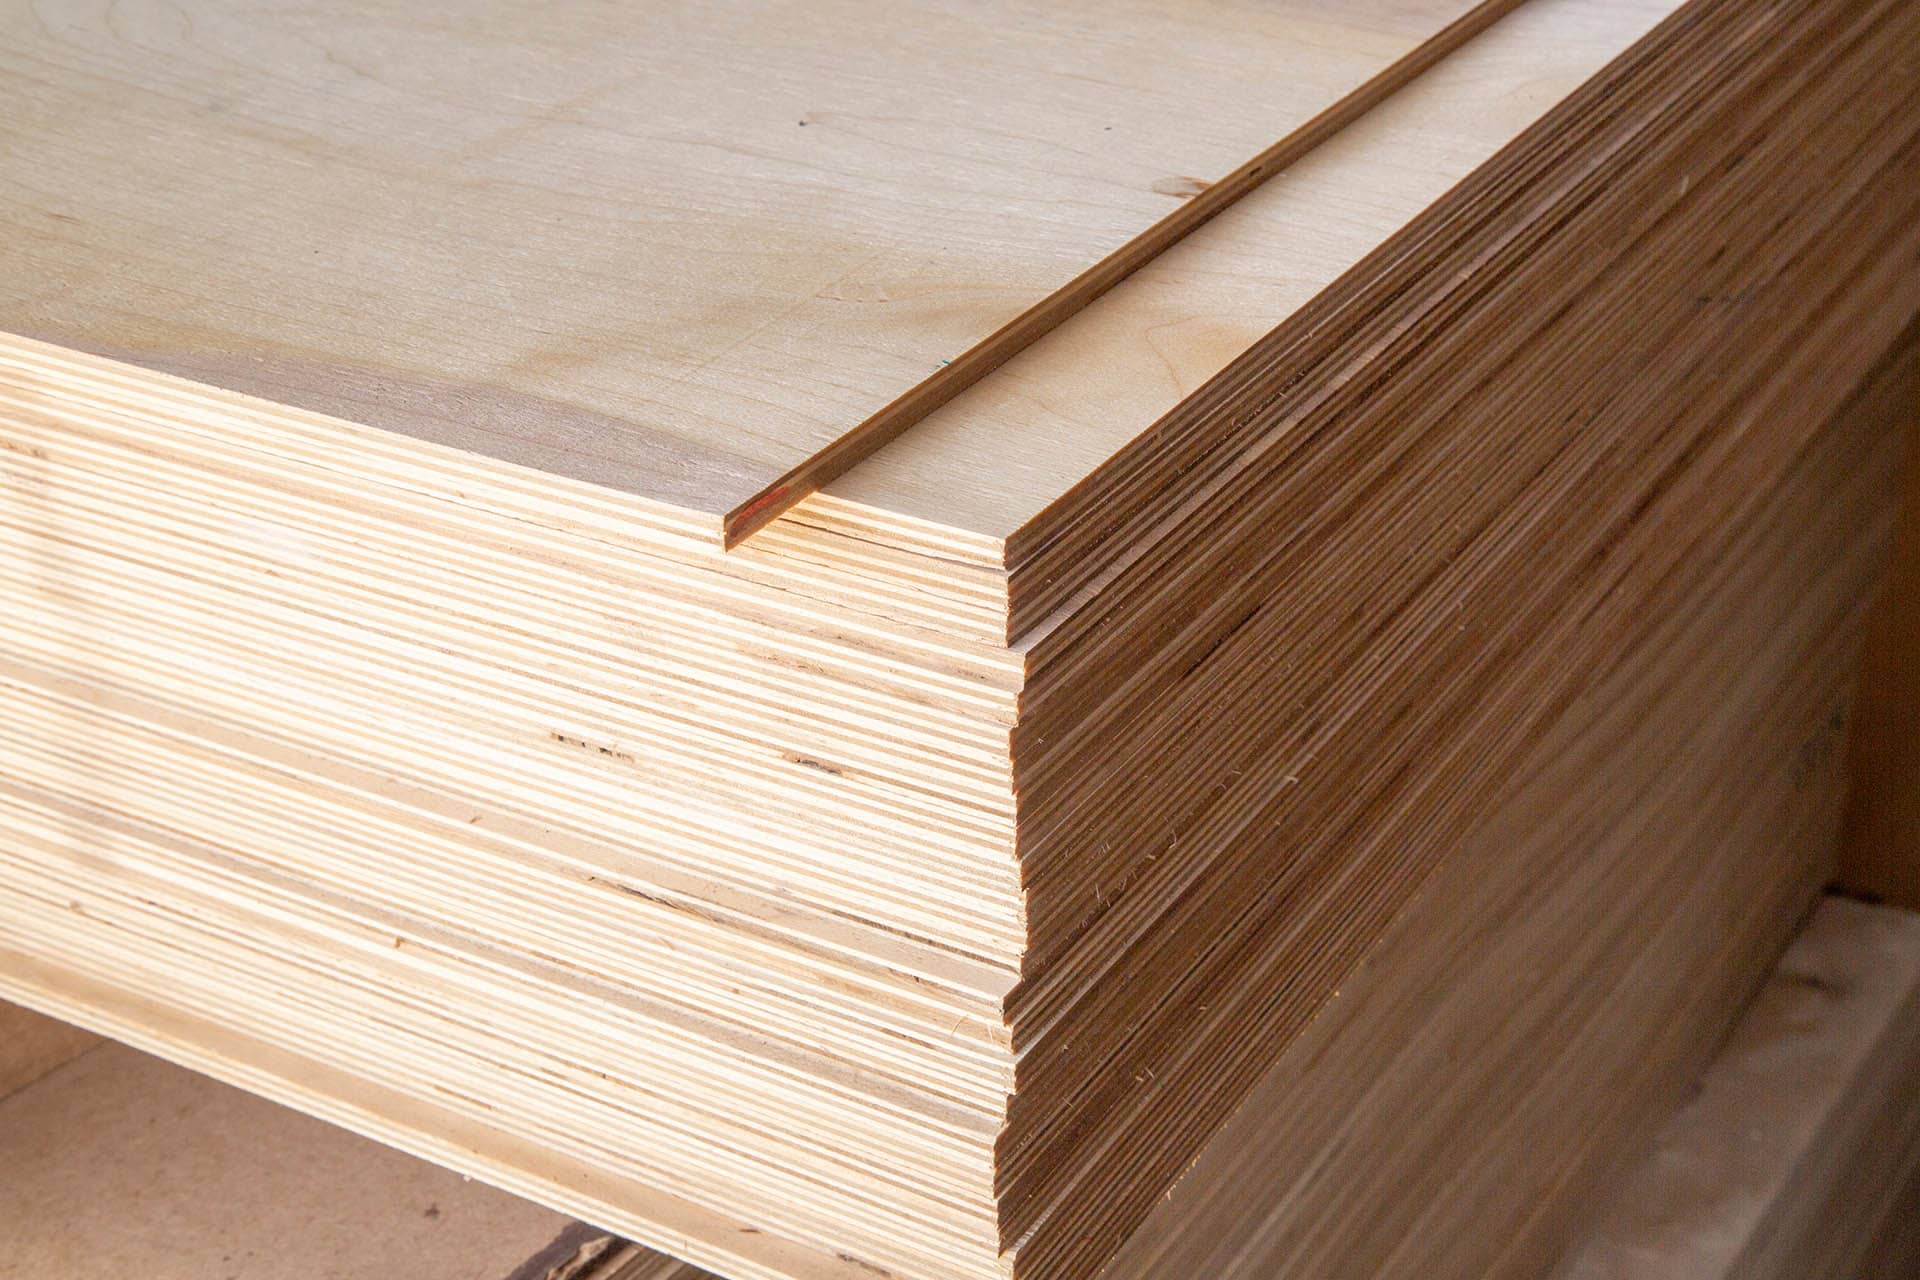 Plywood boards stacked sheet material